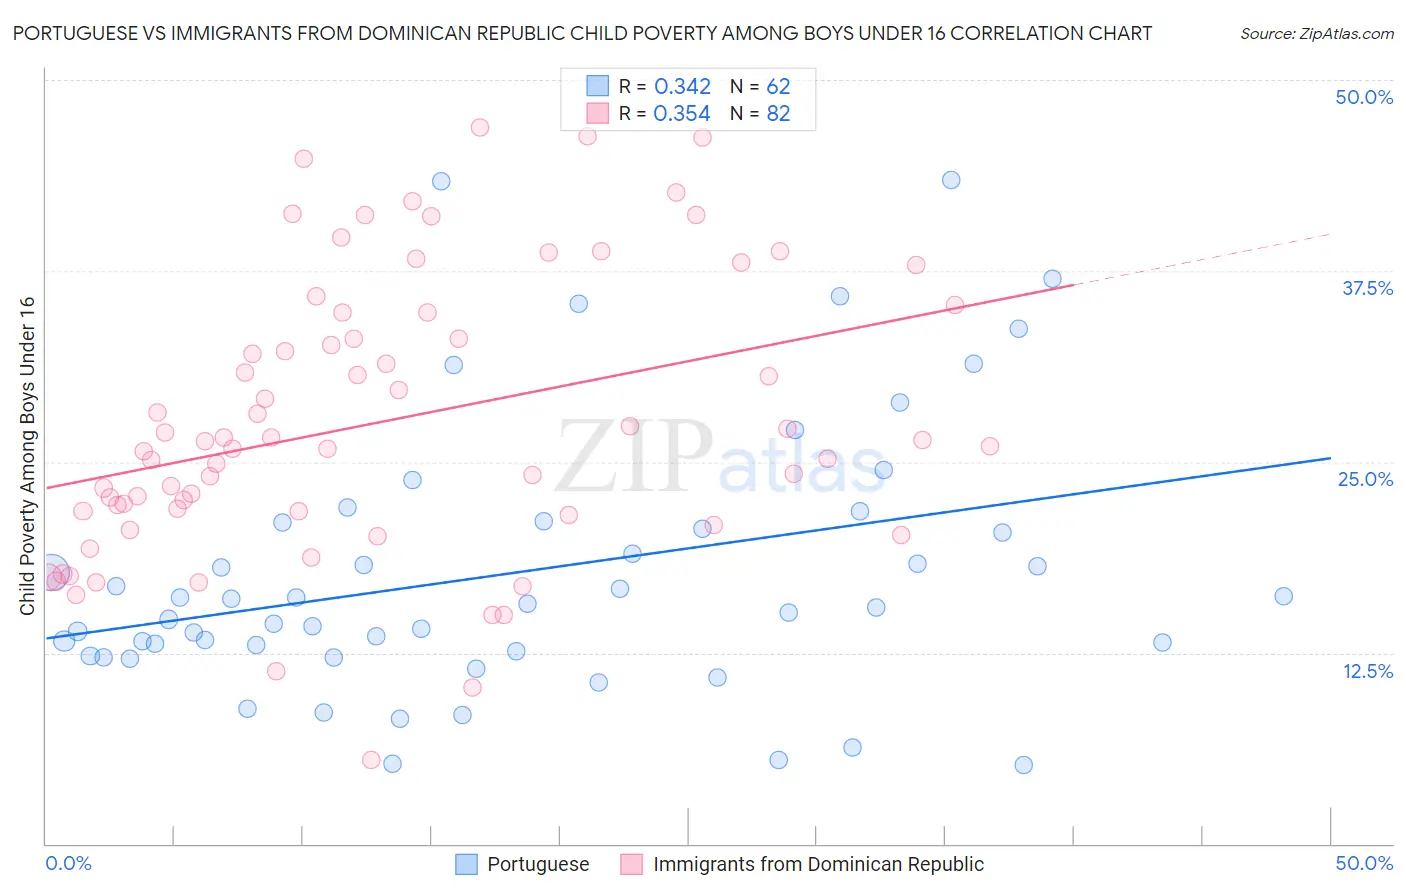 Portuguese vs Immigrants from Dominican Republic Child Poverty Among Boys Under 16